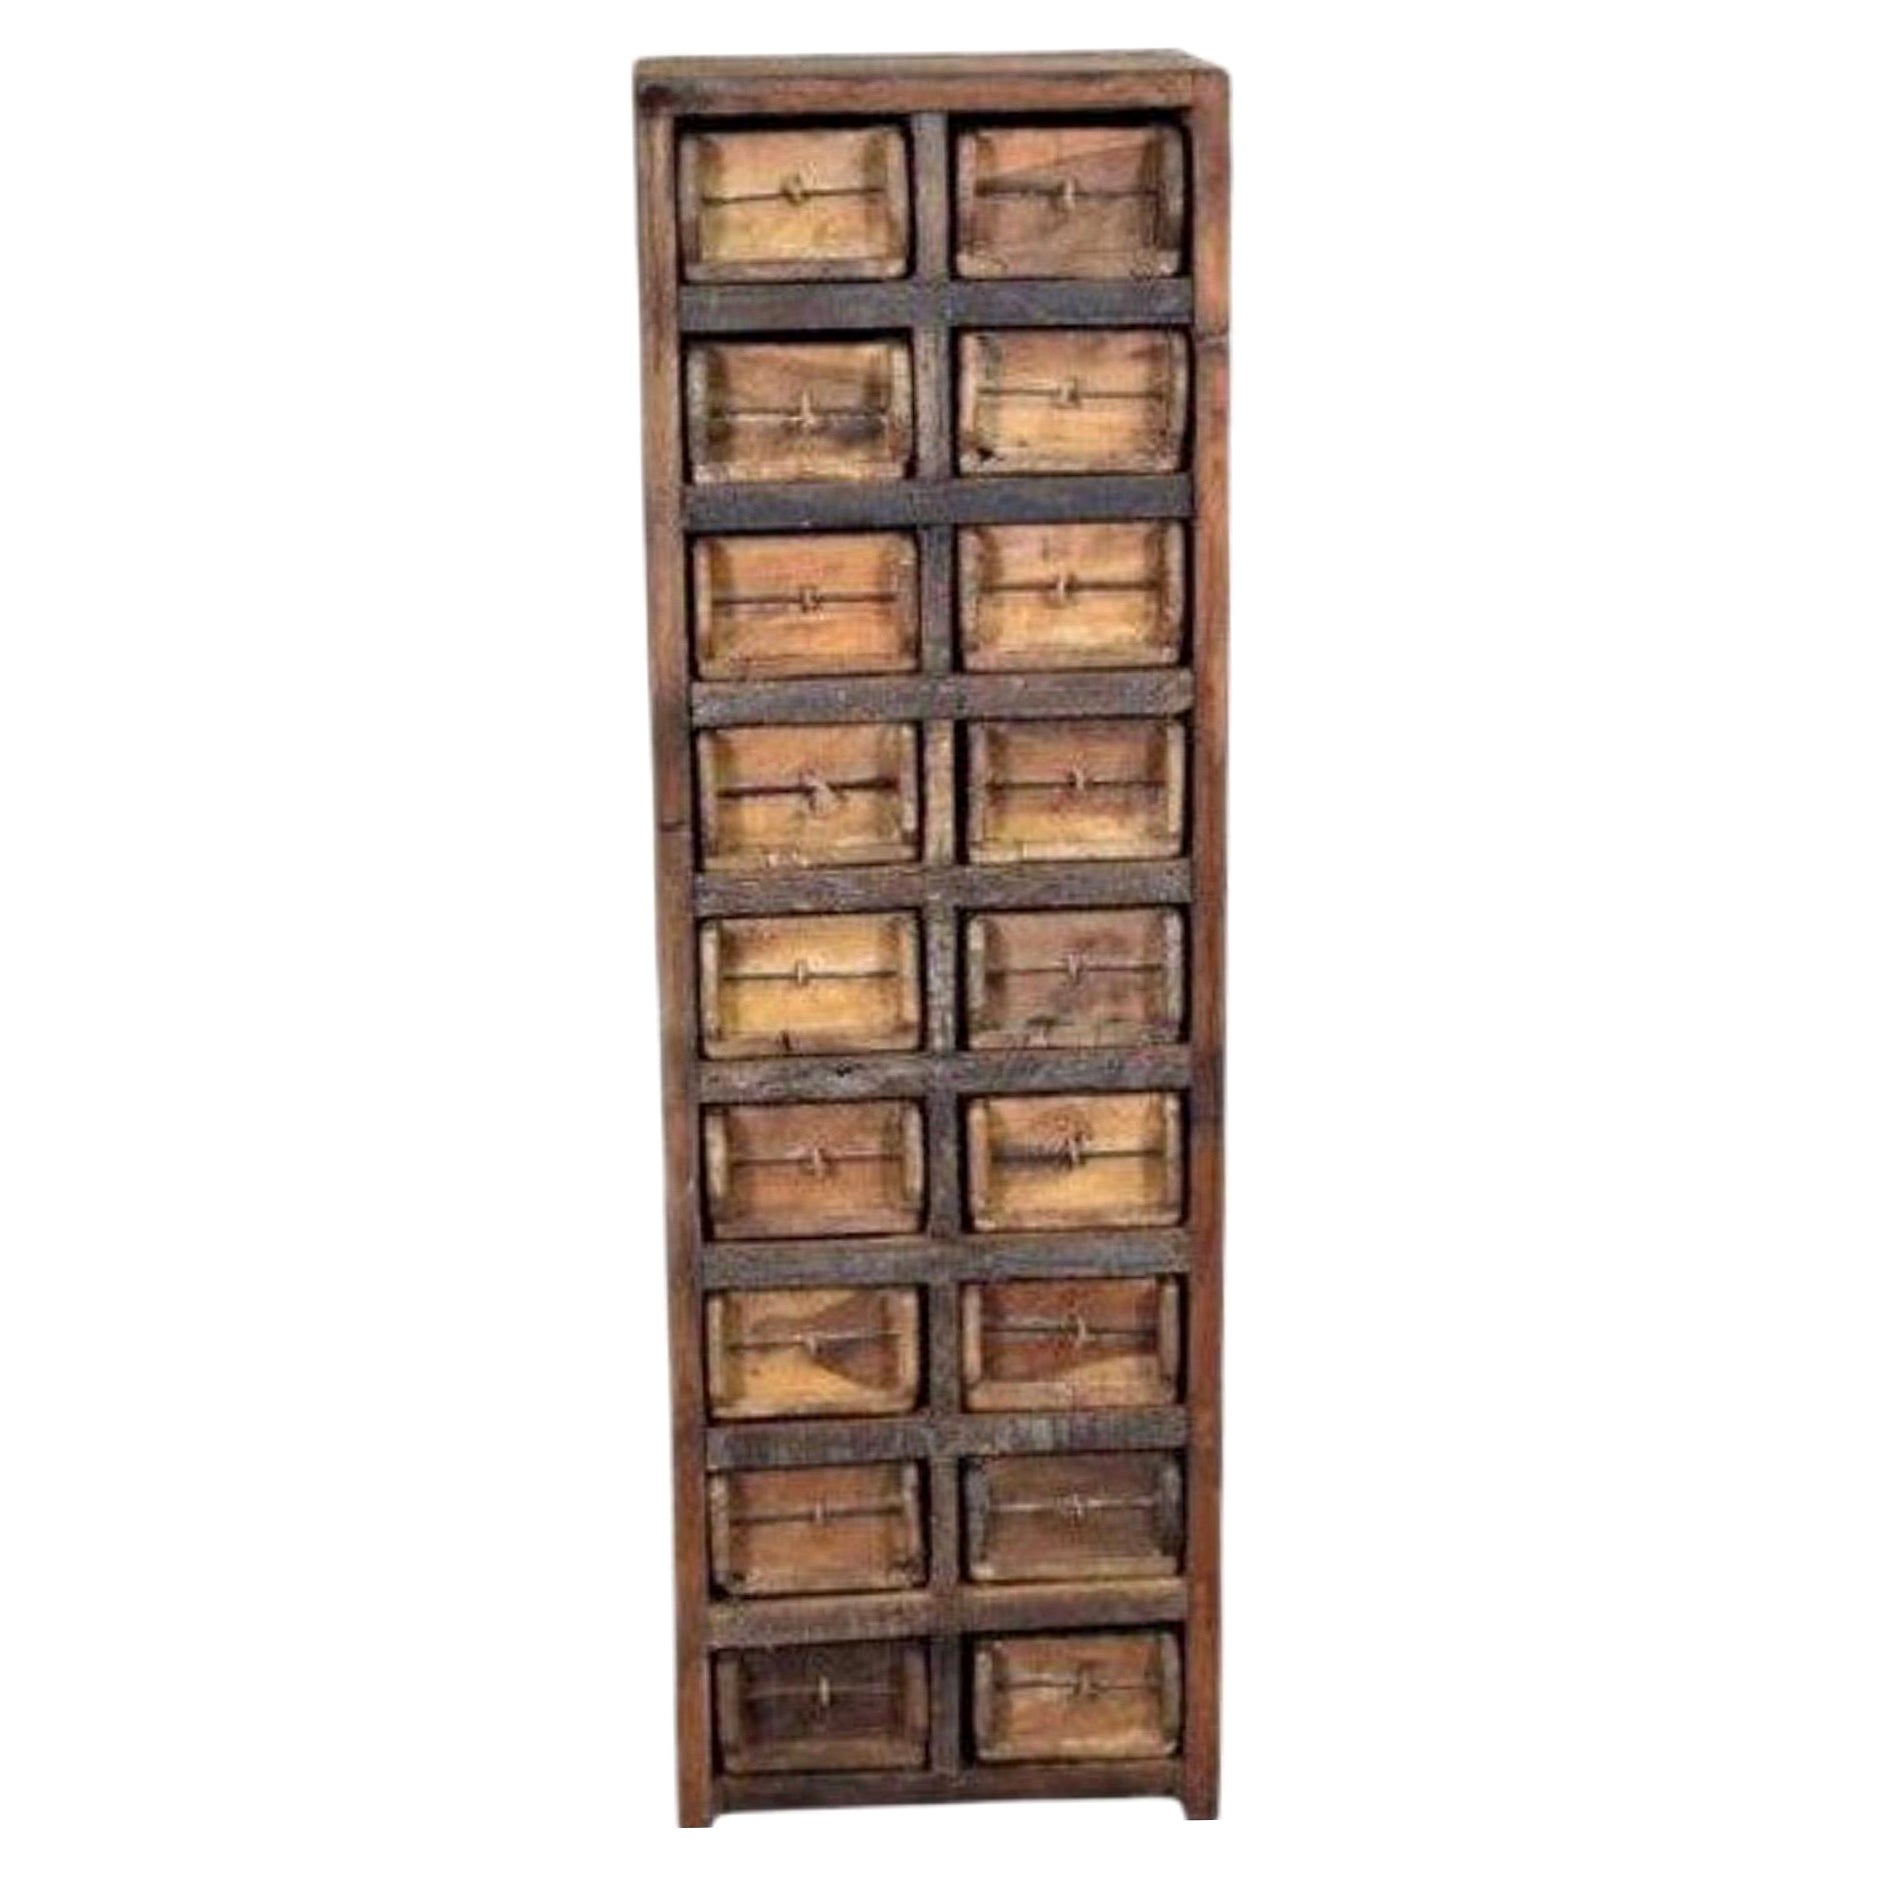 Late 20th Century Arts and Crafts Solid Teak Wood Apothecary Cabinet